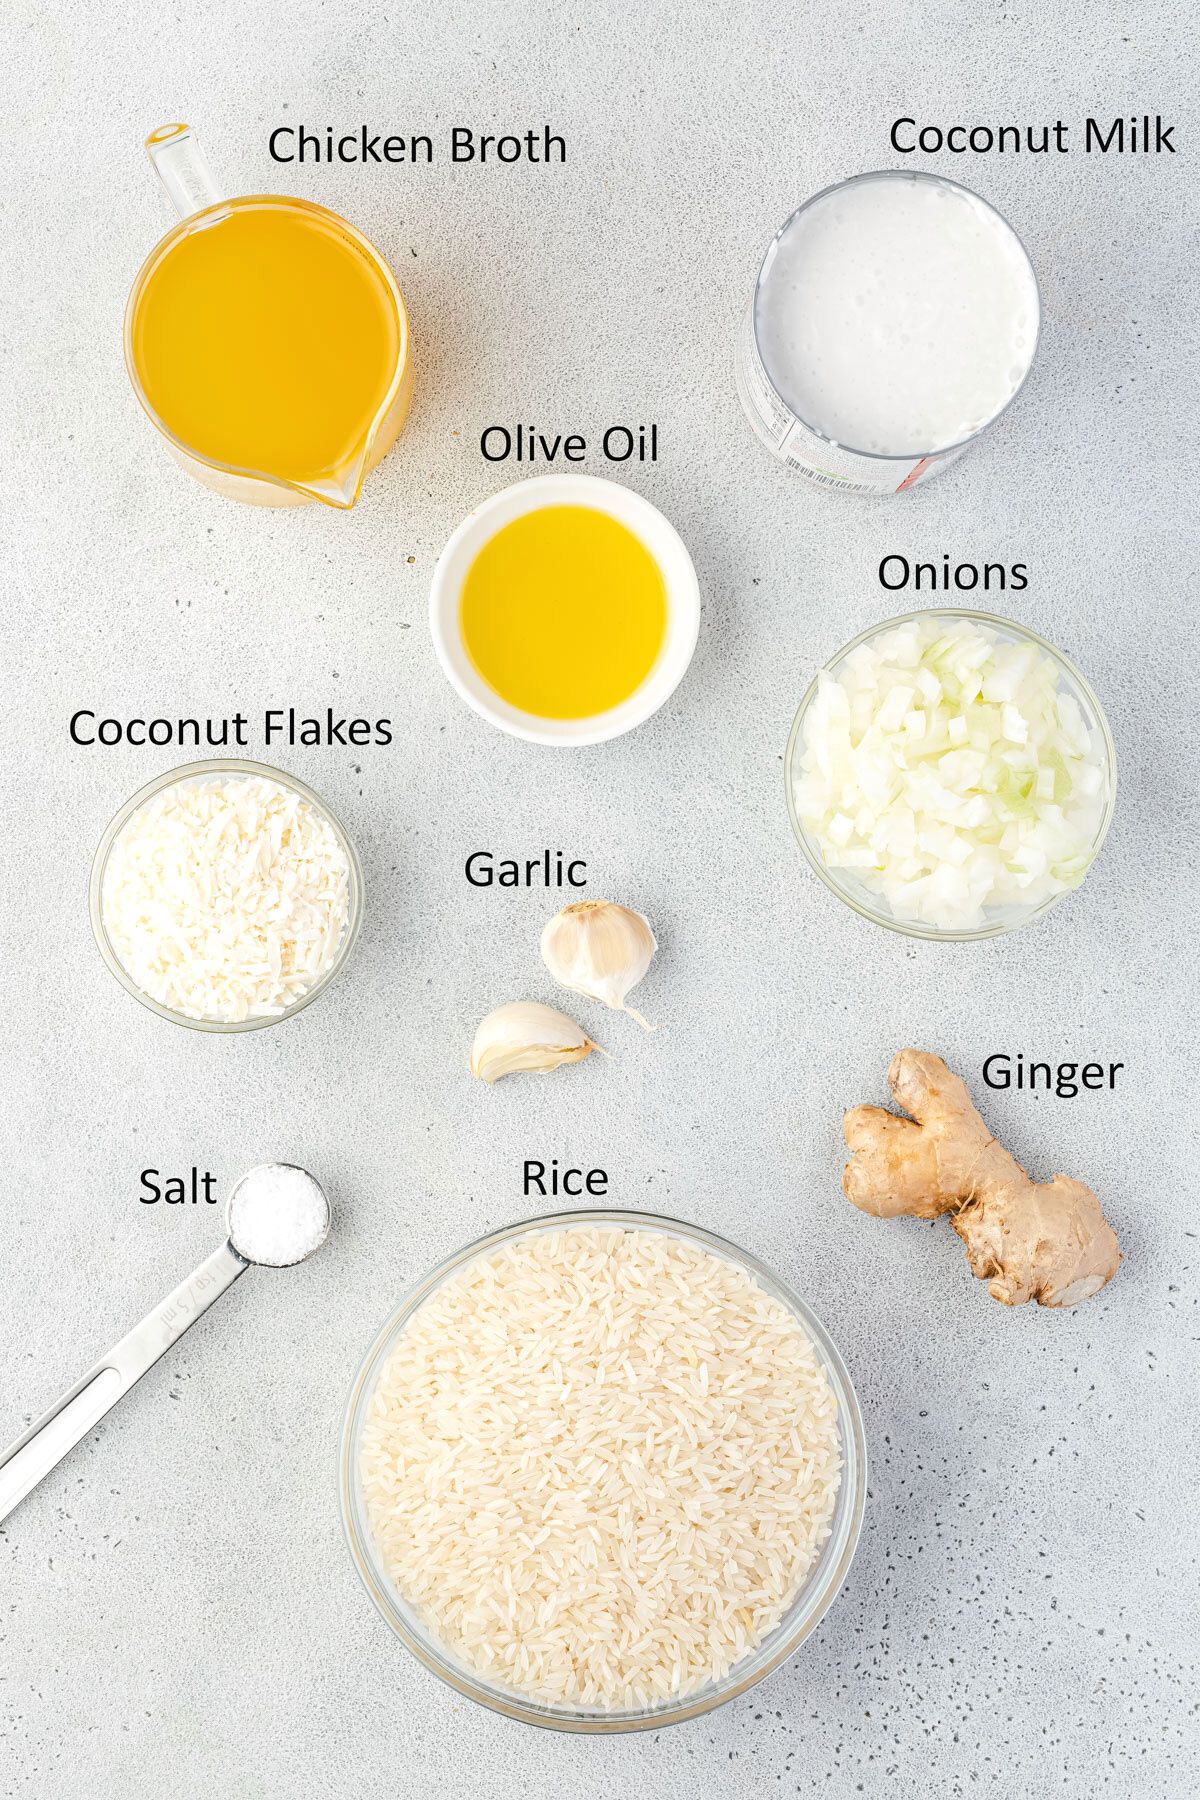 Image showing the labeled ingredients for coconut rice.